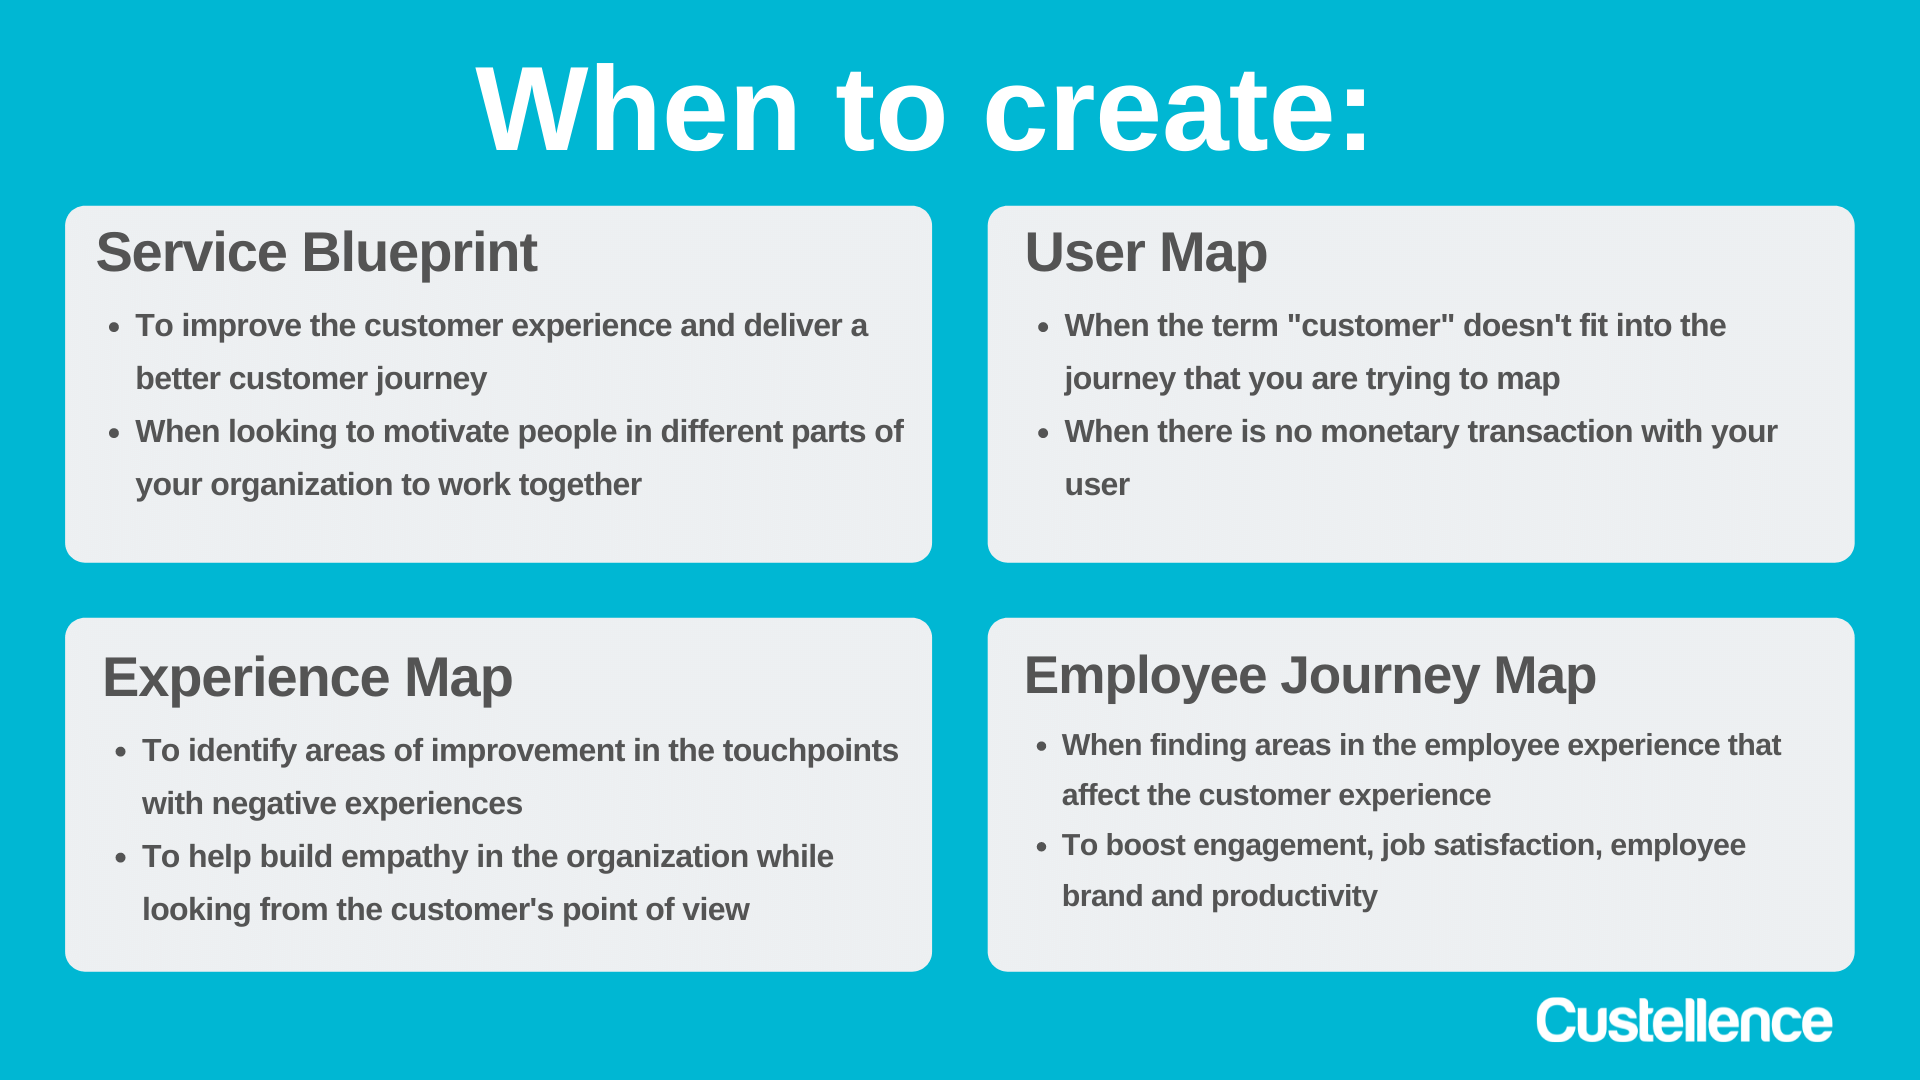 When to create a Service Blueprint, a User Map, an Experience Map and/or an Employee Journey Map?